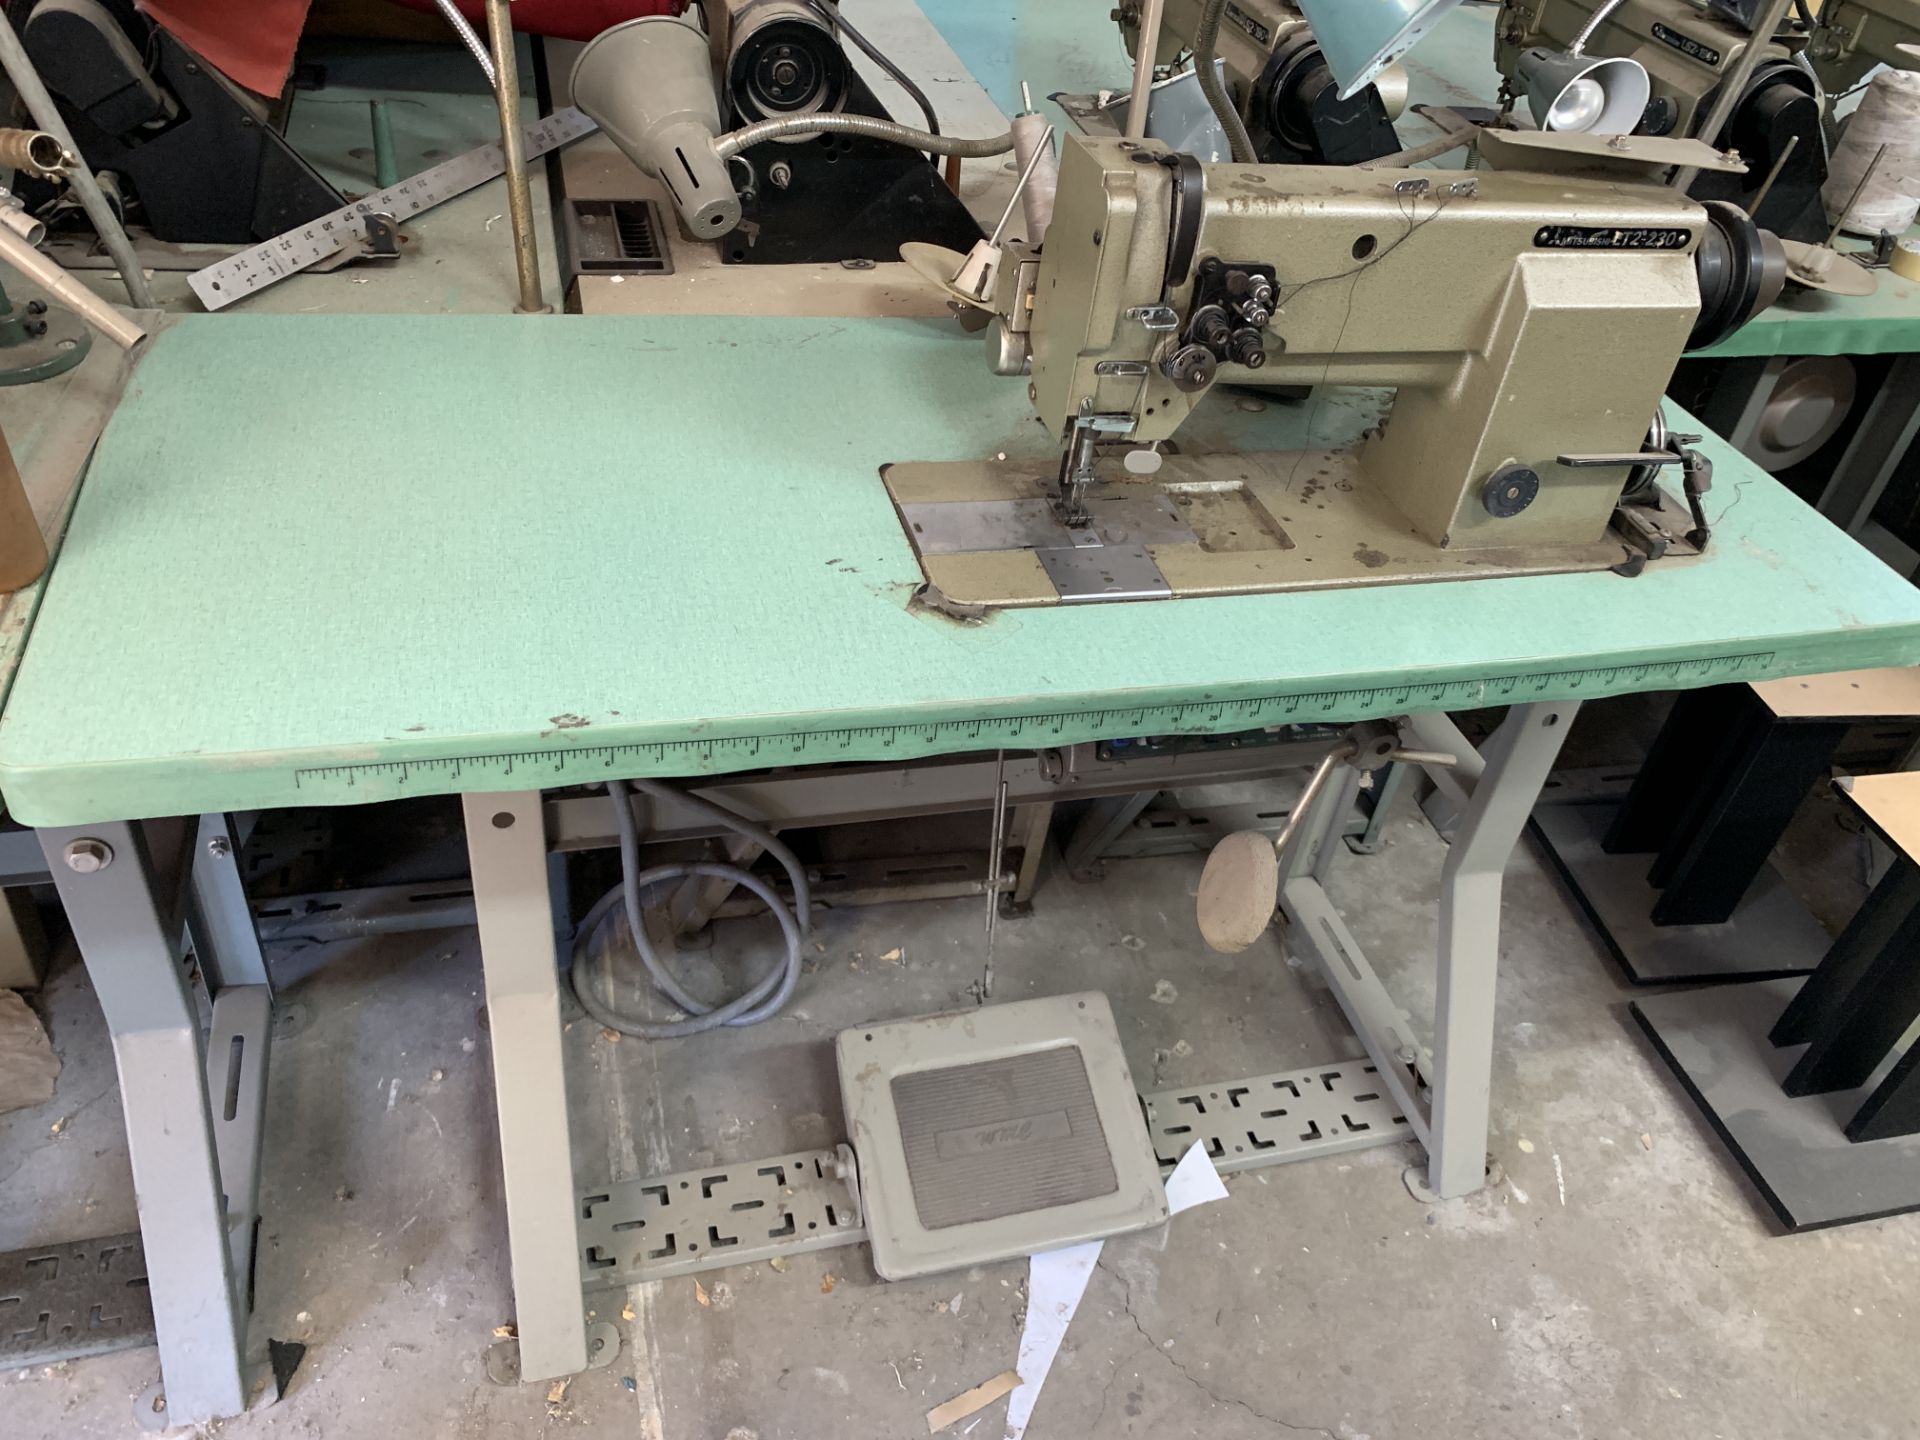 4 x Mitsubishi LT2-190 and LT2-230 2-Needle Sewing Machines, Including Tables *Las Vegas Pick Up - Image 2 of 17